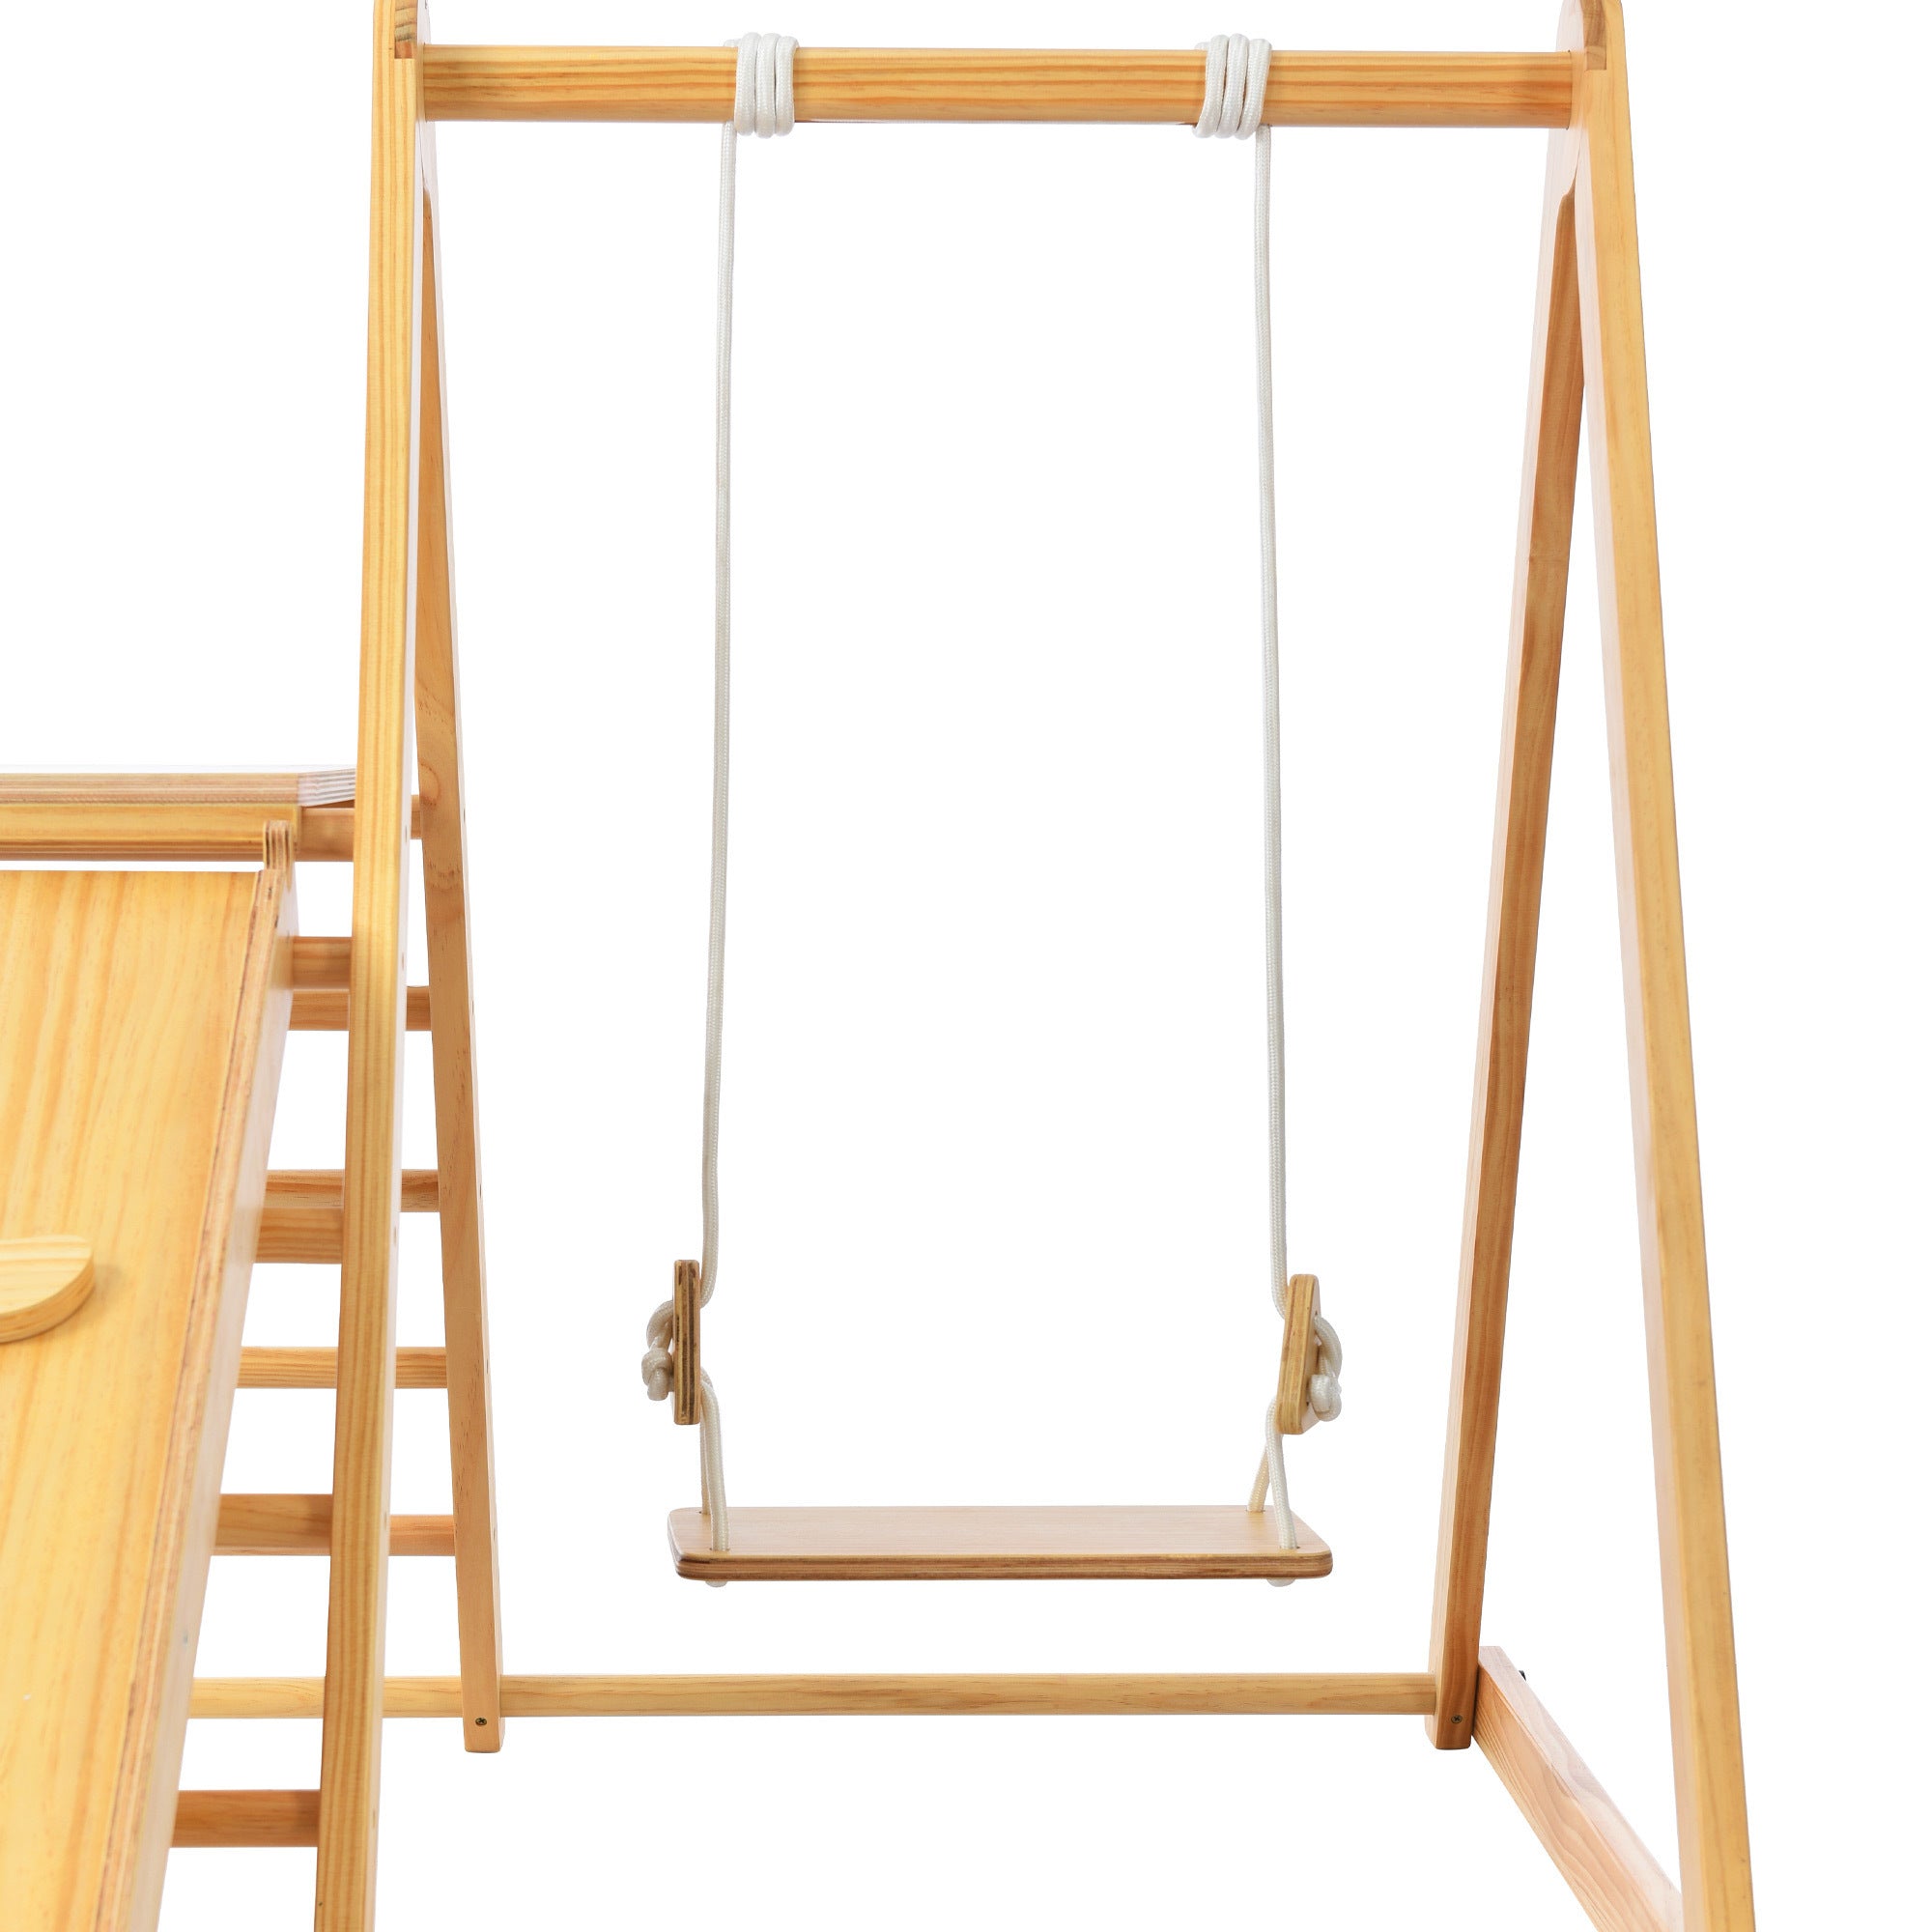 Wooden Swing and Slide Set Indoor Foldable Climbing Playground Play set for Kids/Toddlers